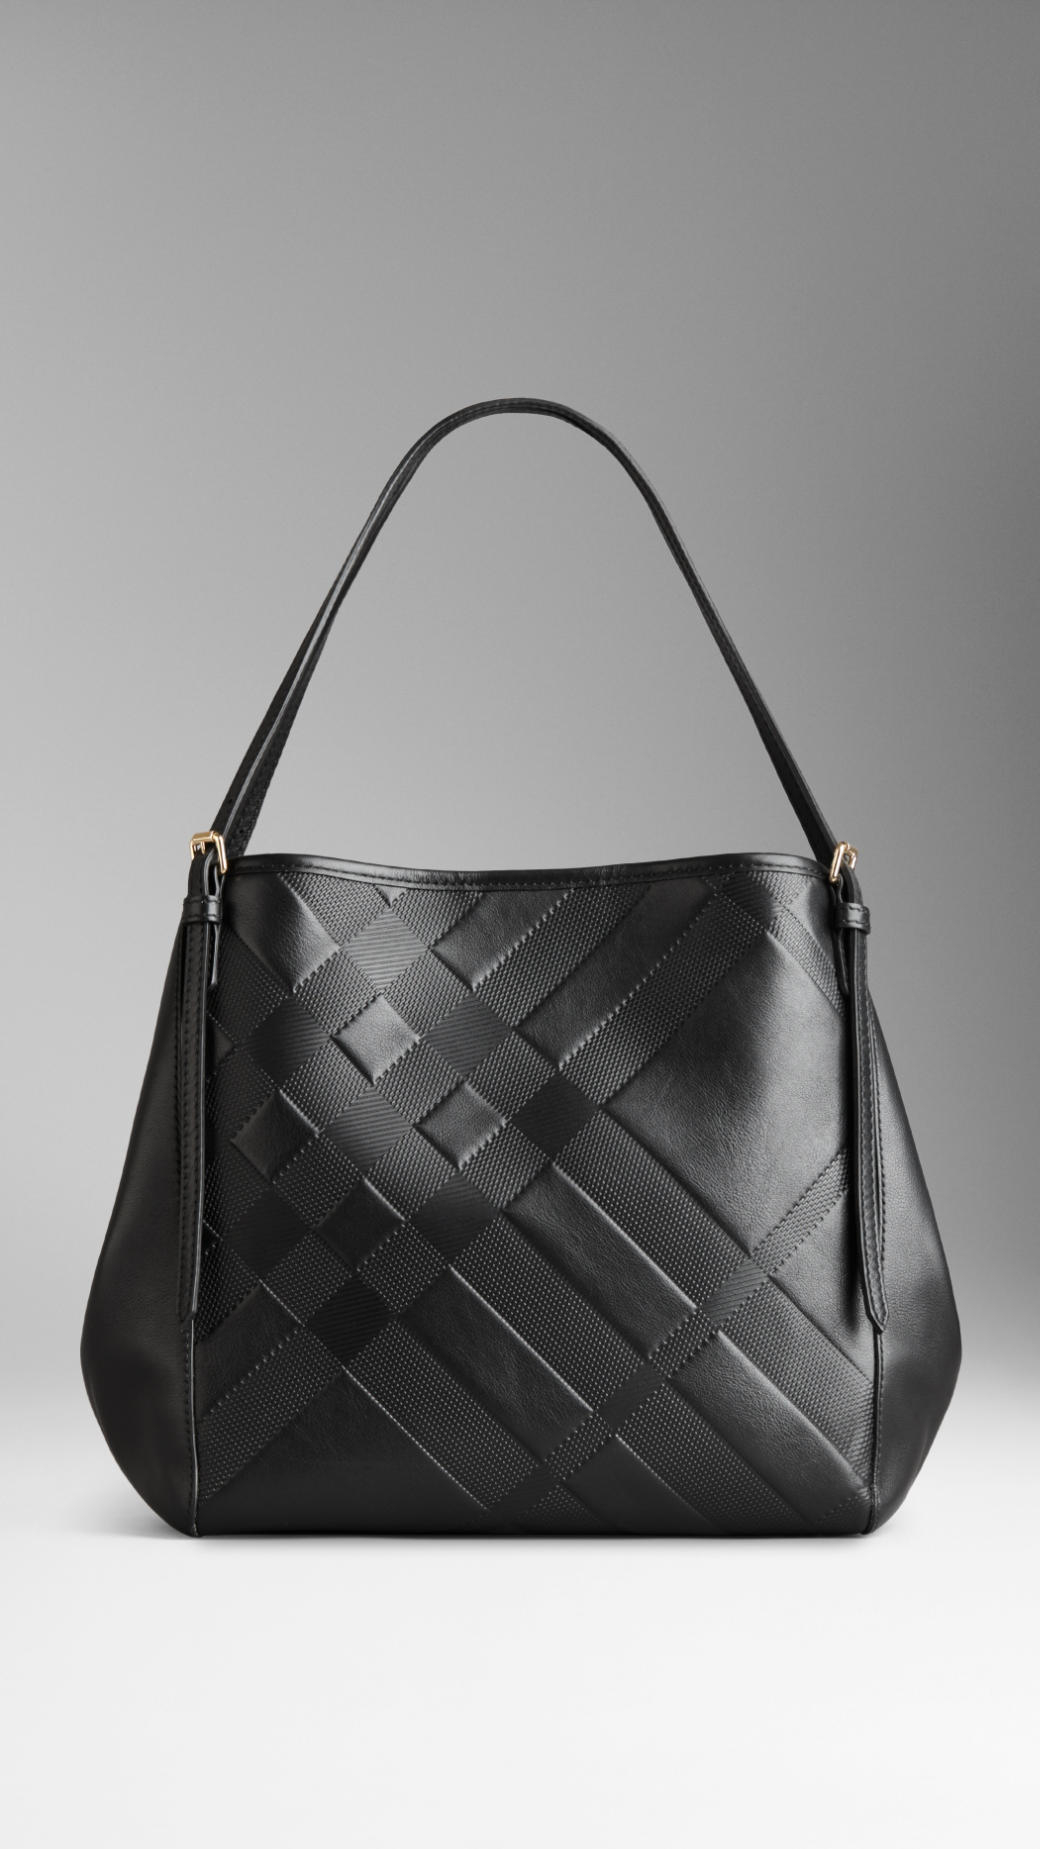 Burberry Small Embossed Check Leather Tote Bag in Black | Lyst